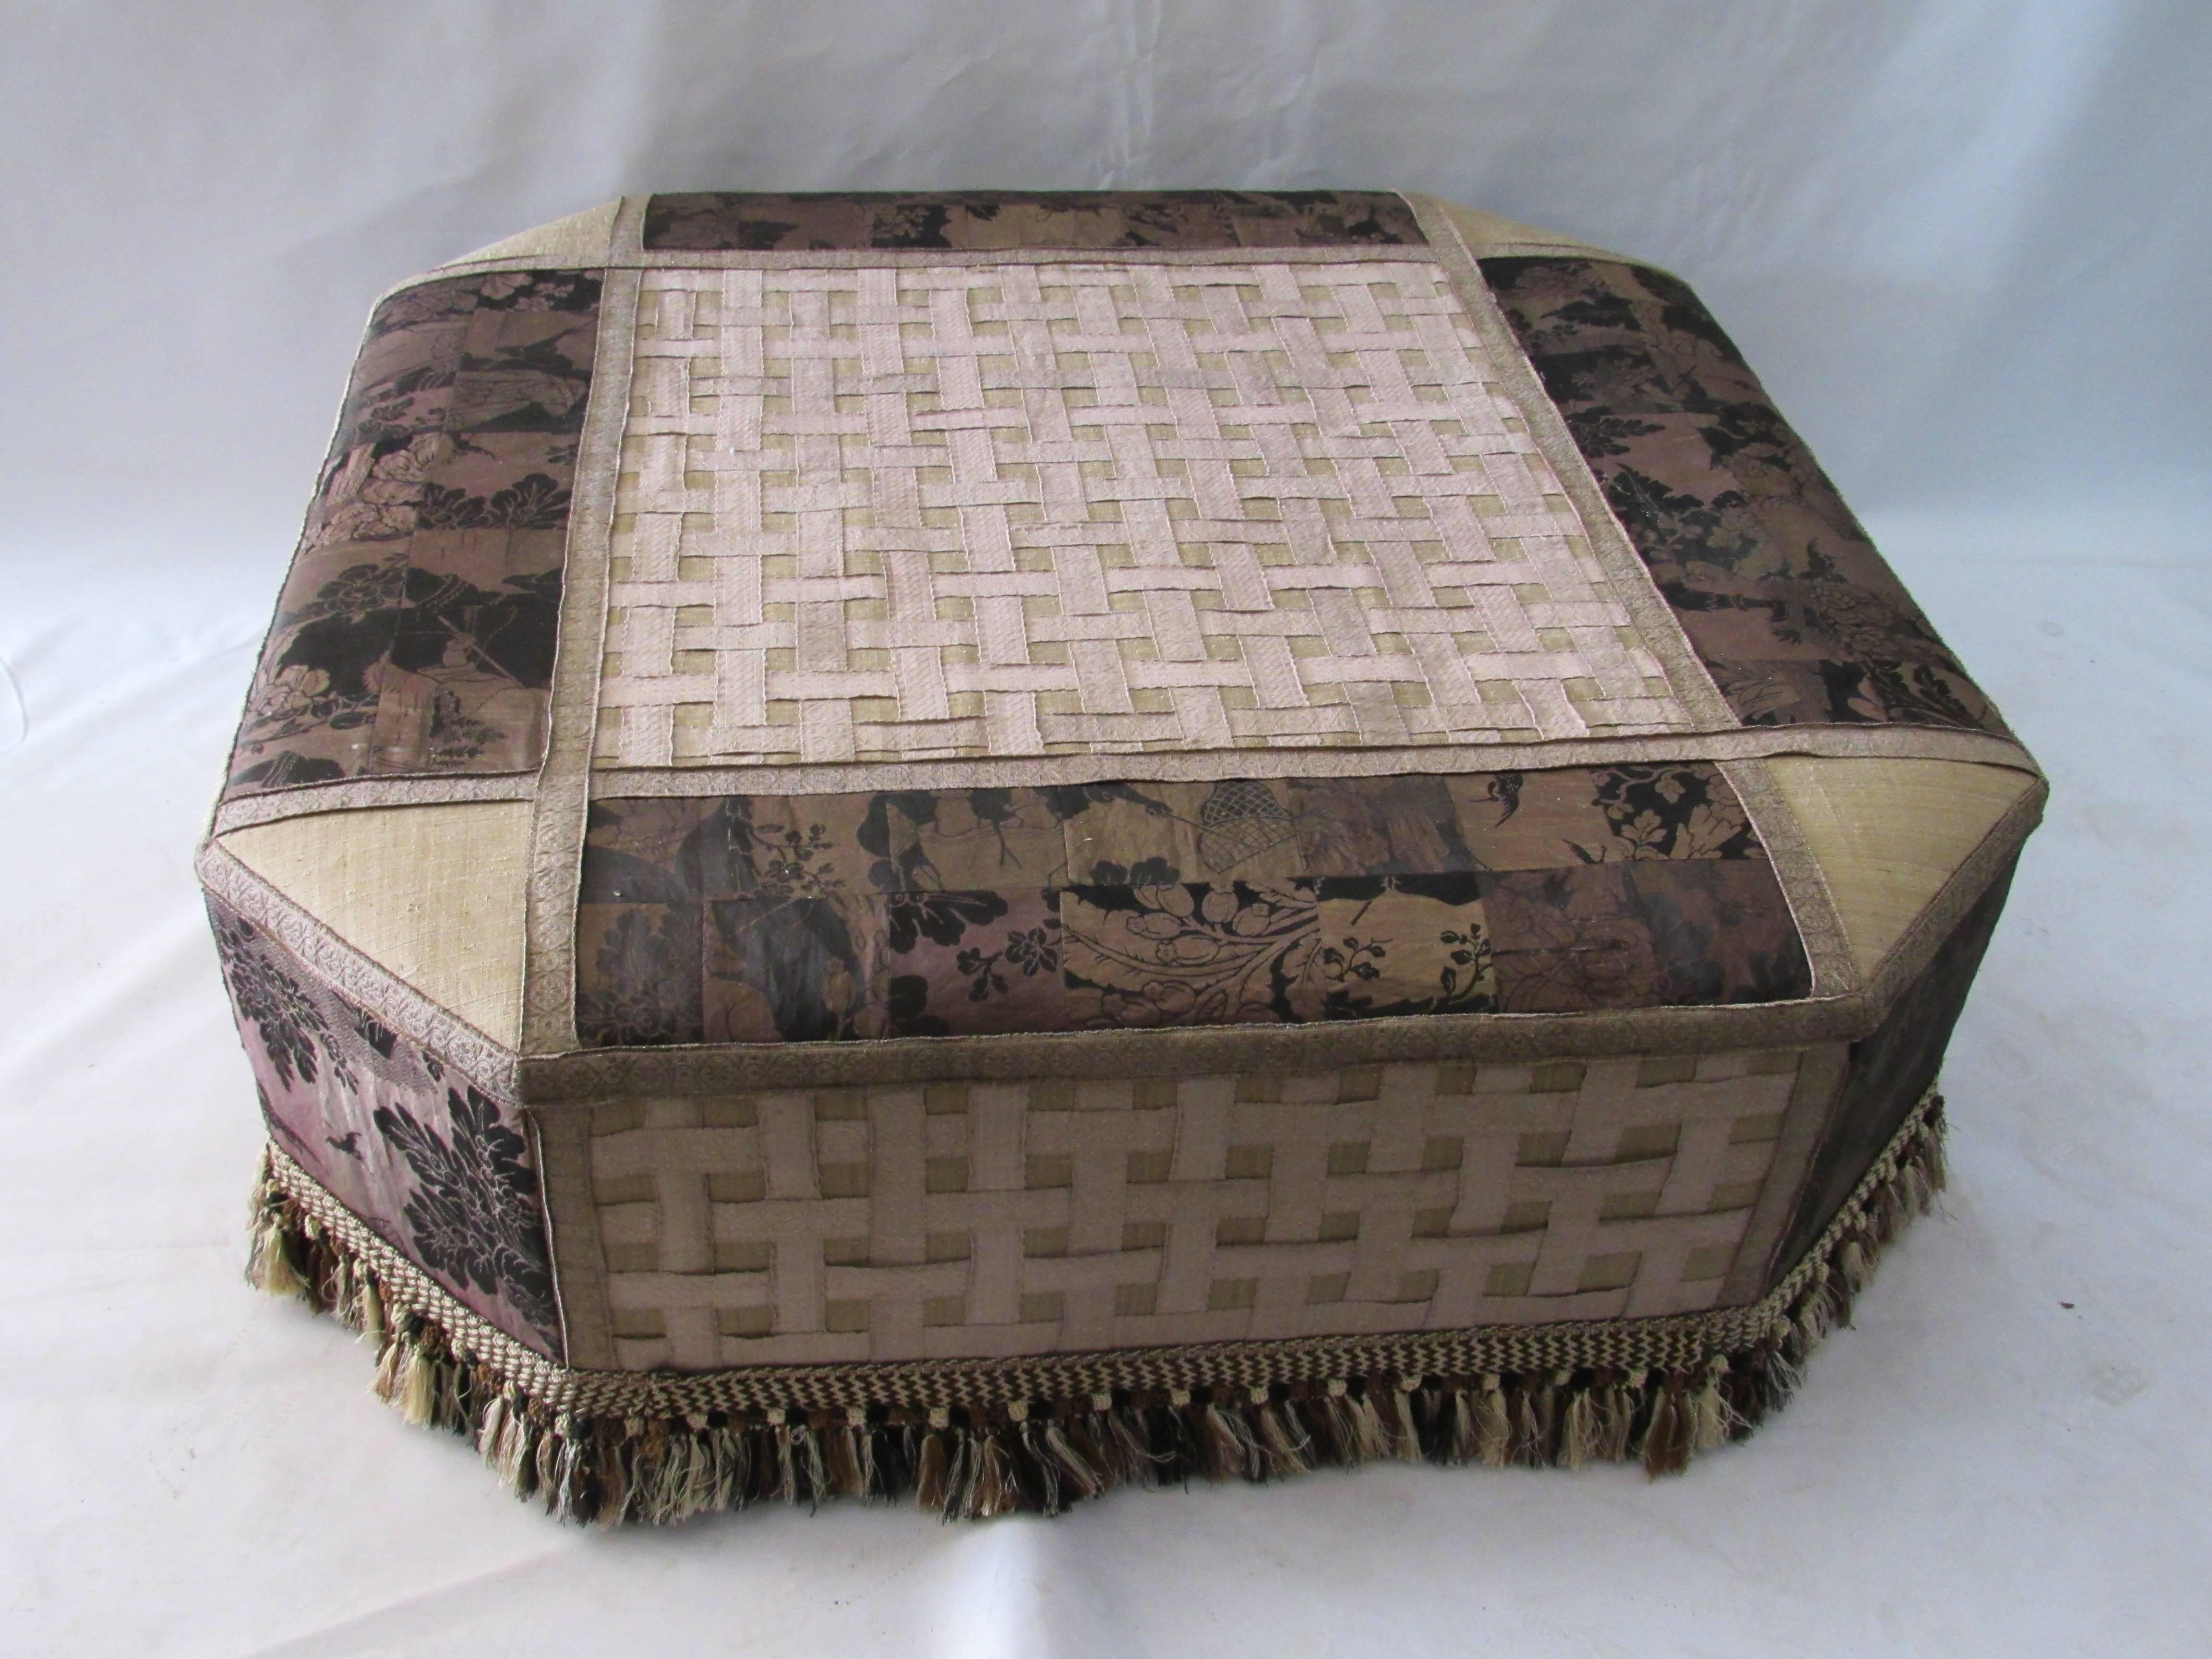 Sophisticated ottoman with antique upholstery. The square shaped ottoman with canted corners is upholstered with beautiful woven black and brown damask with gold thread. It has been sewn in a patch work design and is applied with borders of old